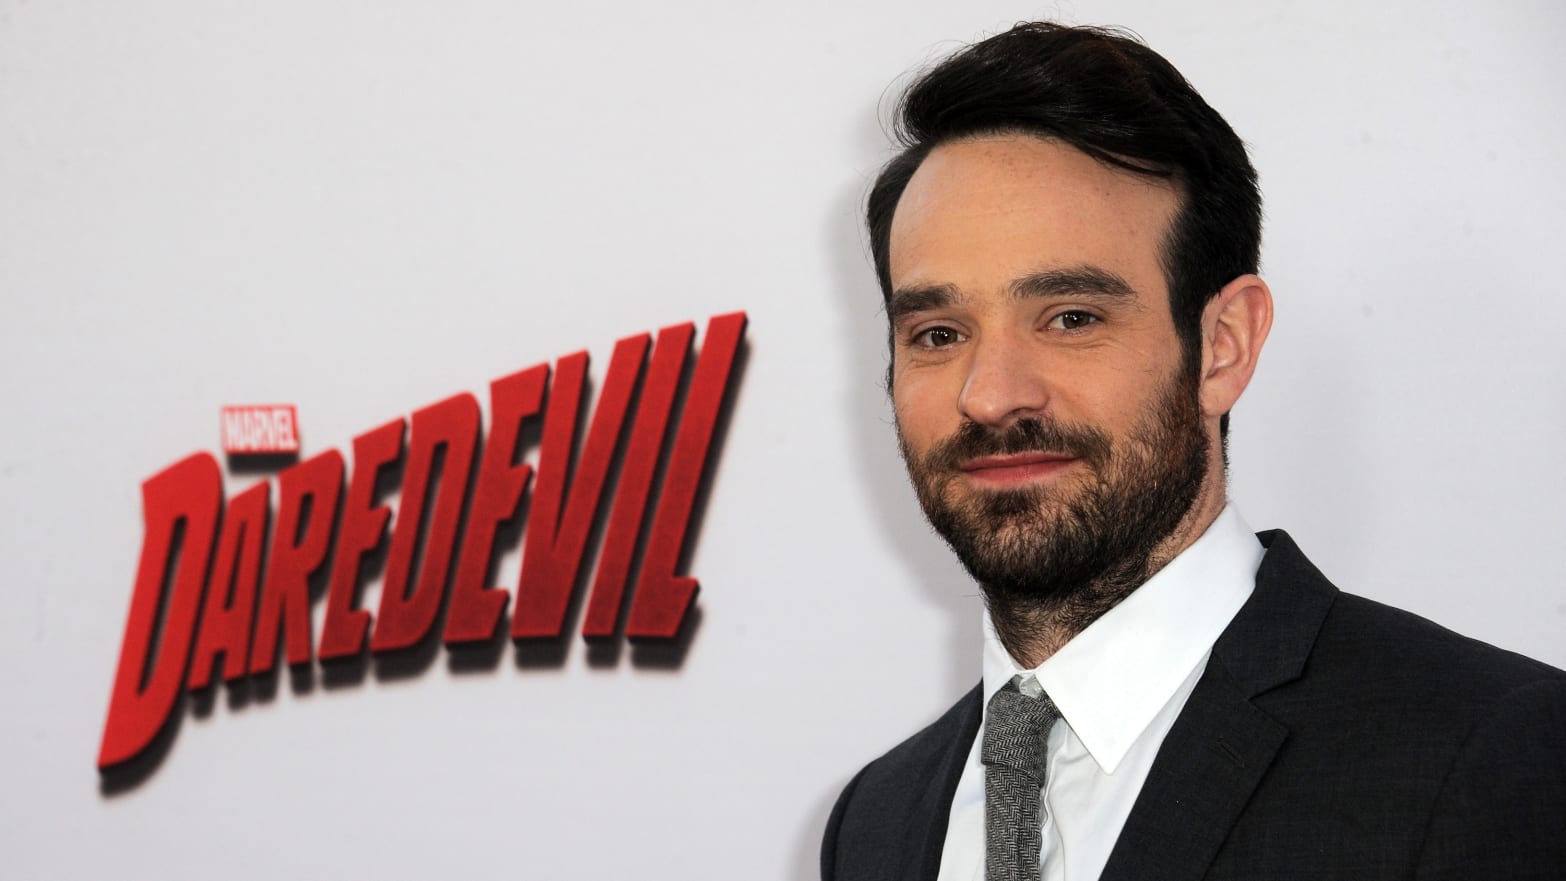 Charlie Cox stands in front of a "Daredevil" backdrop at a premiere event